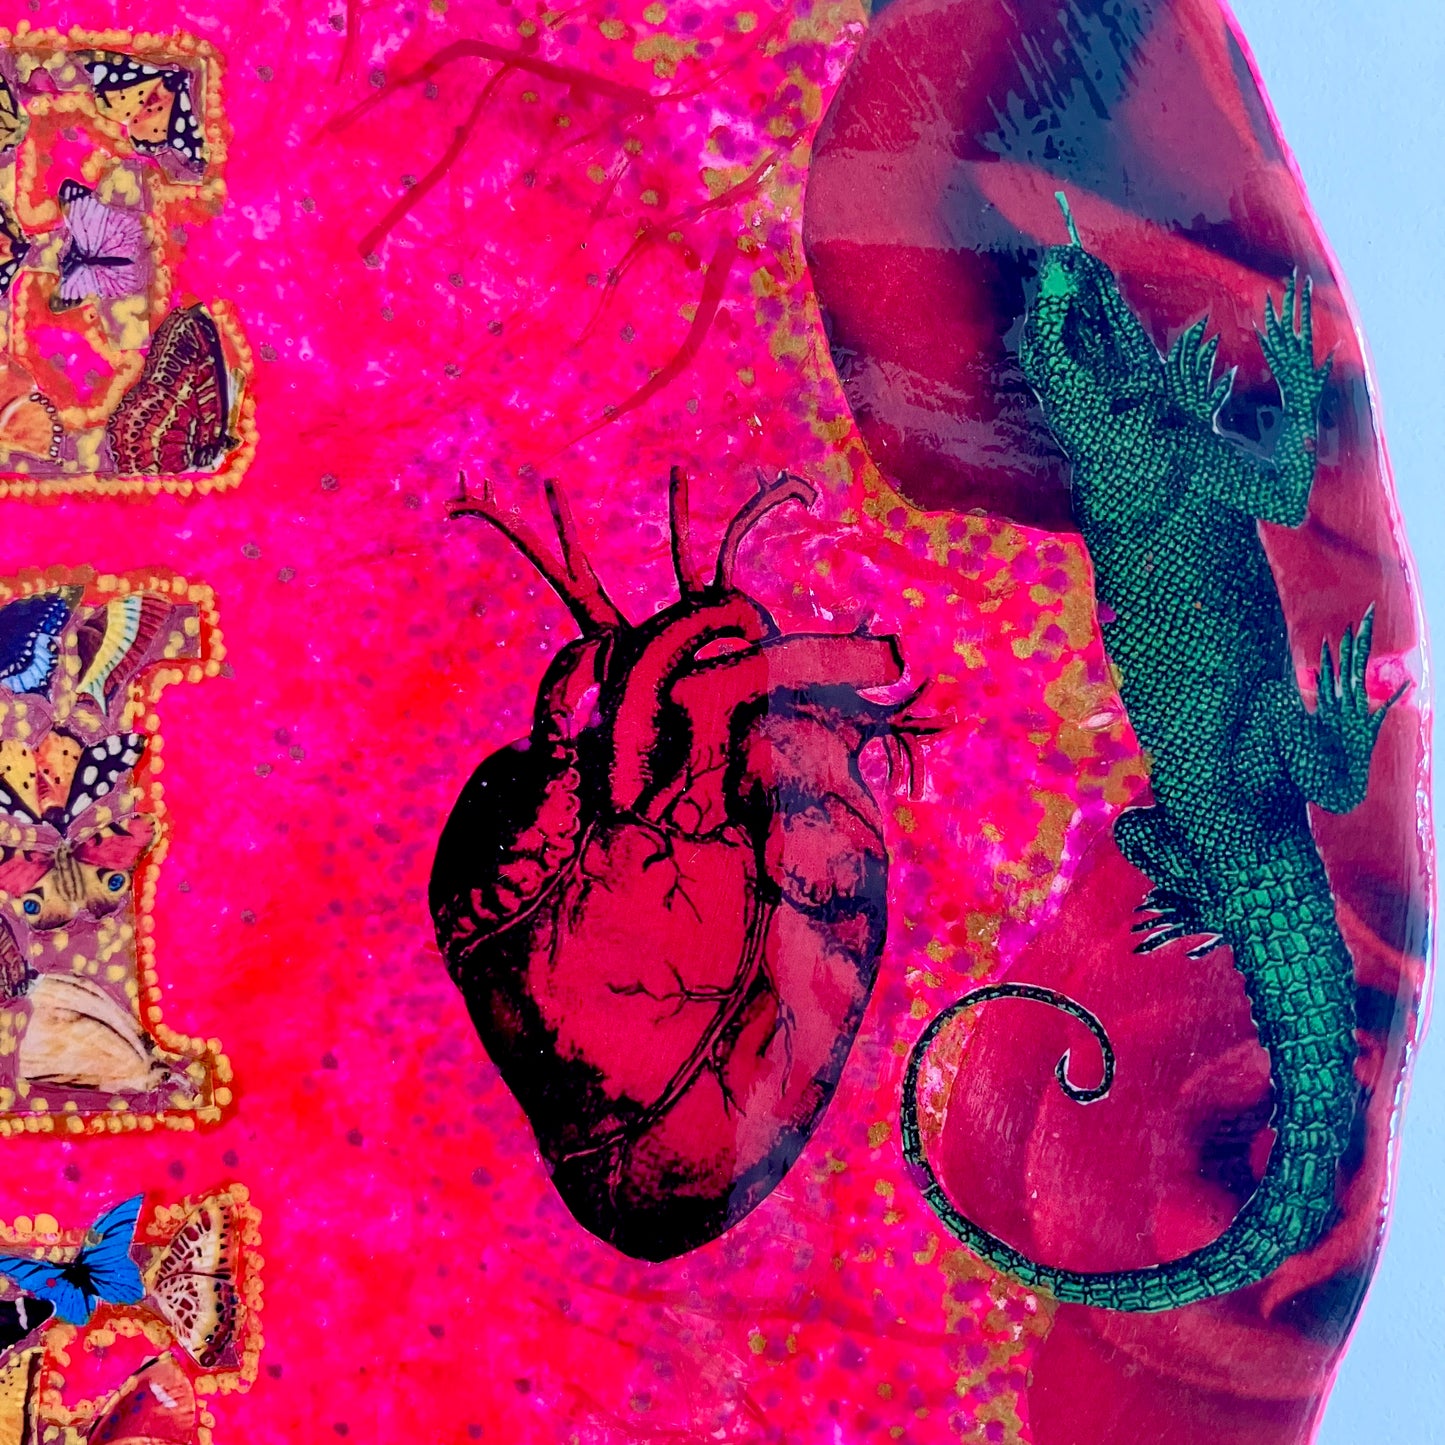 "Desire" Wall Plate by House of Frisson, featuring a collage with the word "desire" written with moths, and a frame of red roses and green lizards, on a hot pink background. Closeup detail of a lizard, roses, and an anatomical human heart illustration.